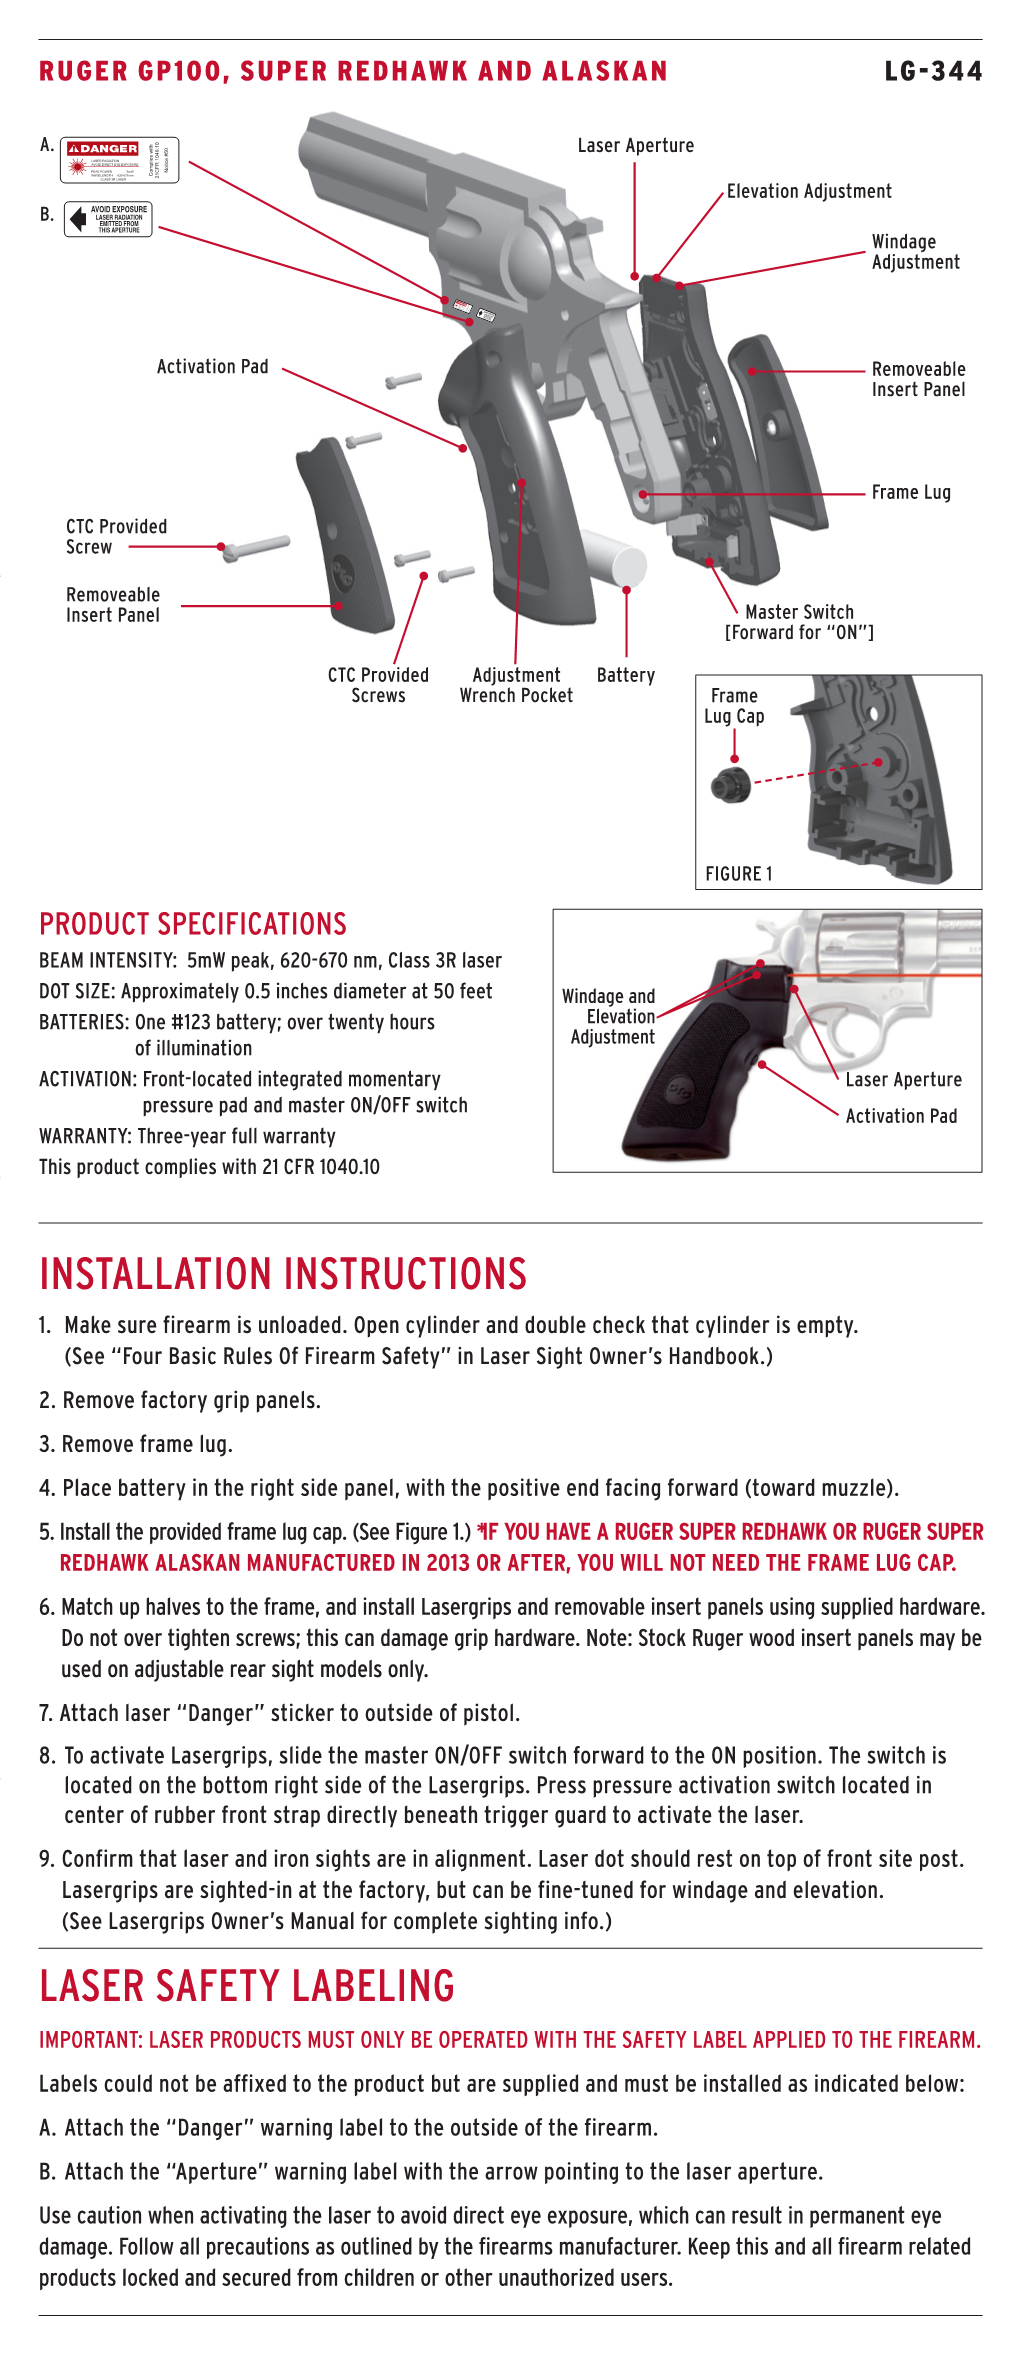 Installation Instructions Laser Safety Labeling